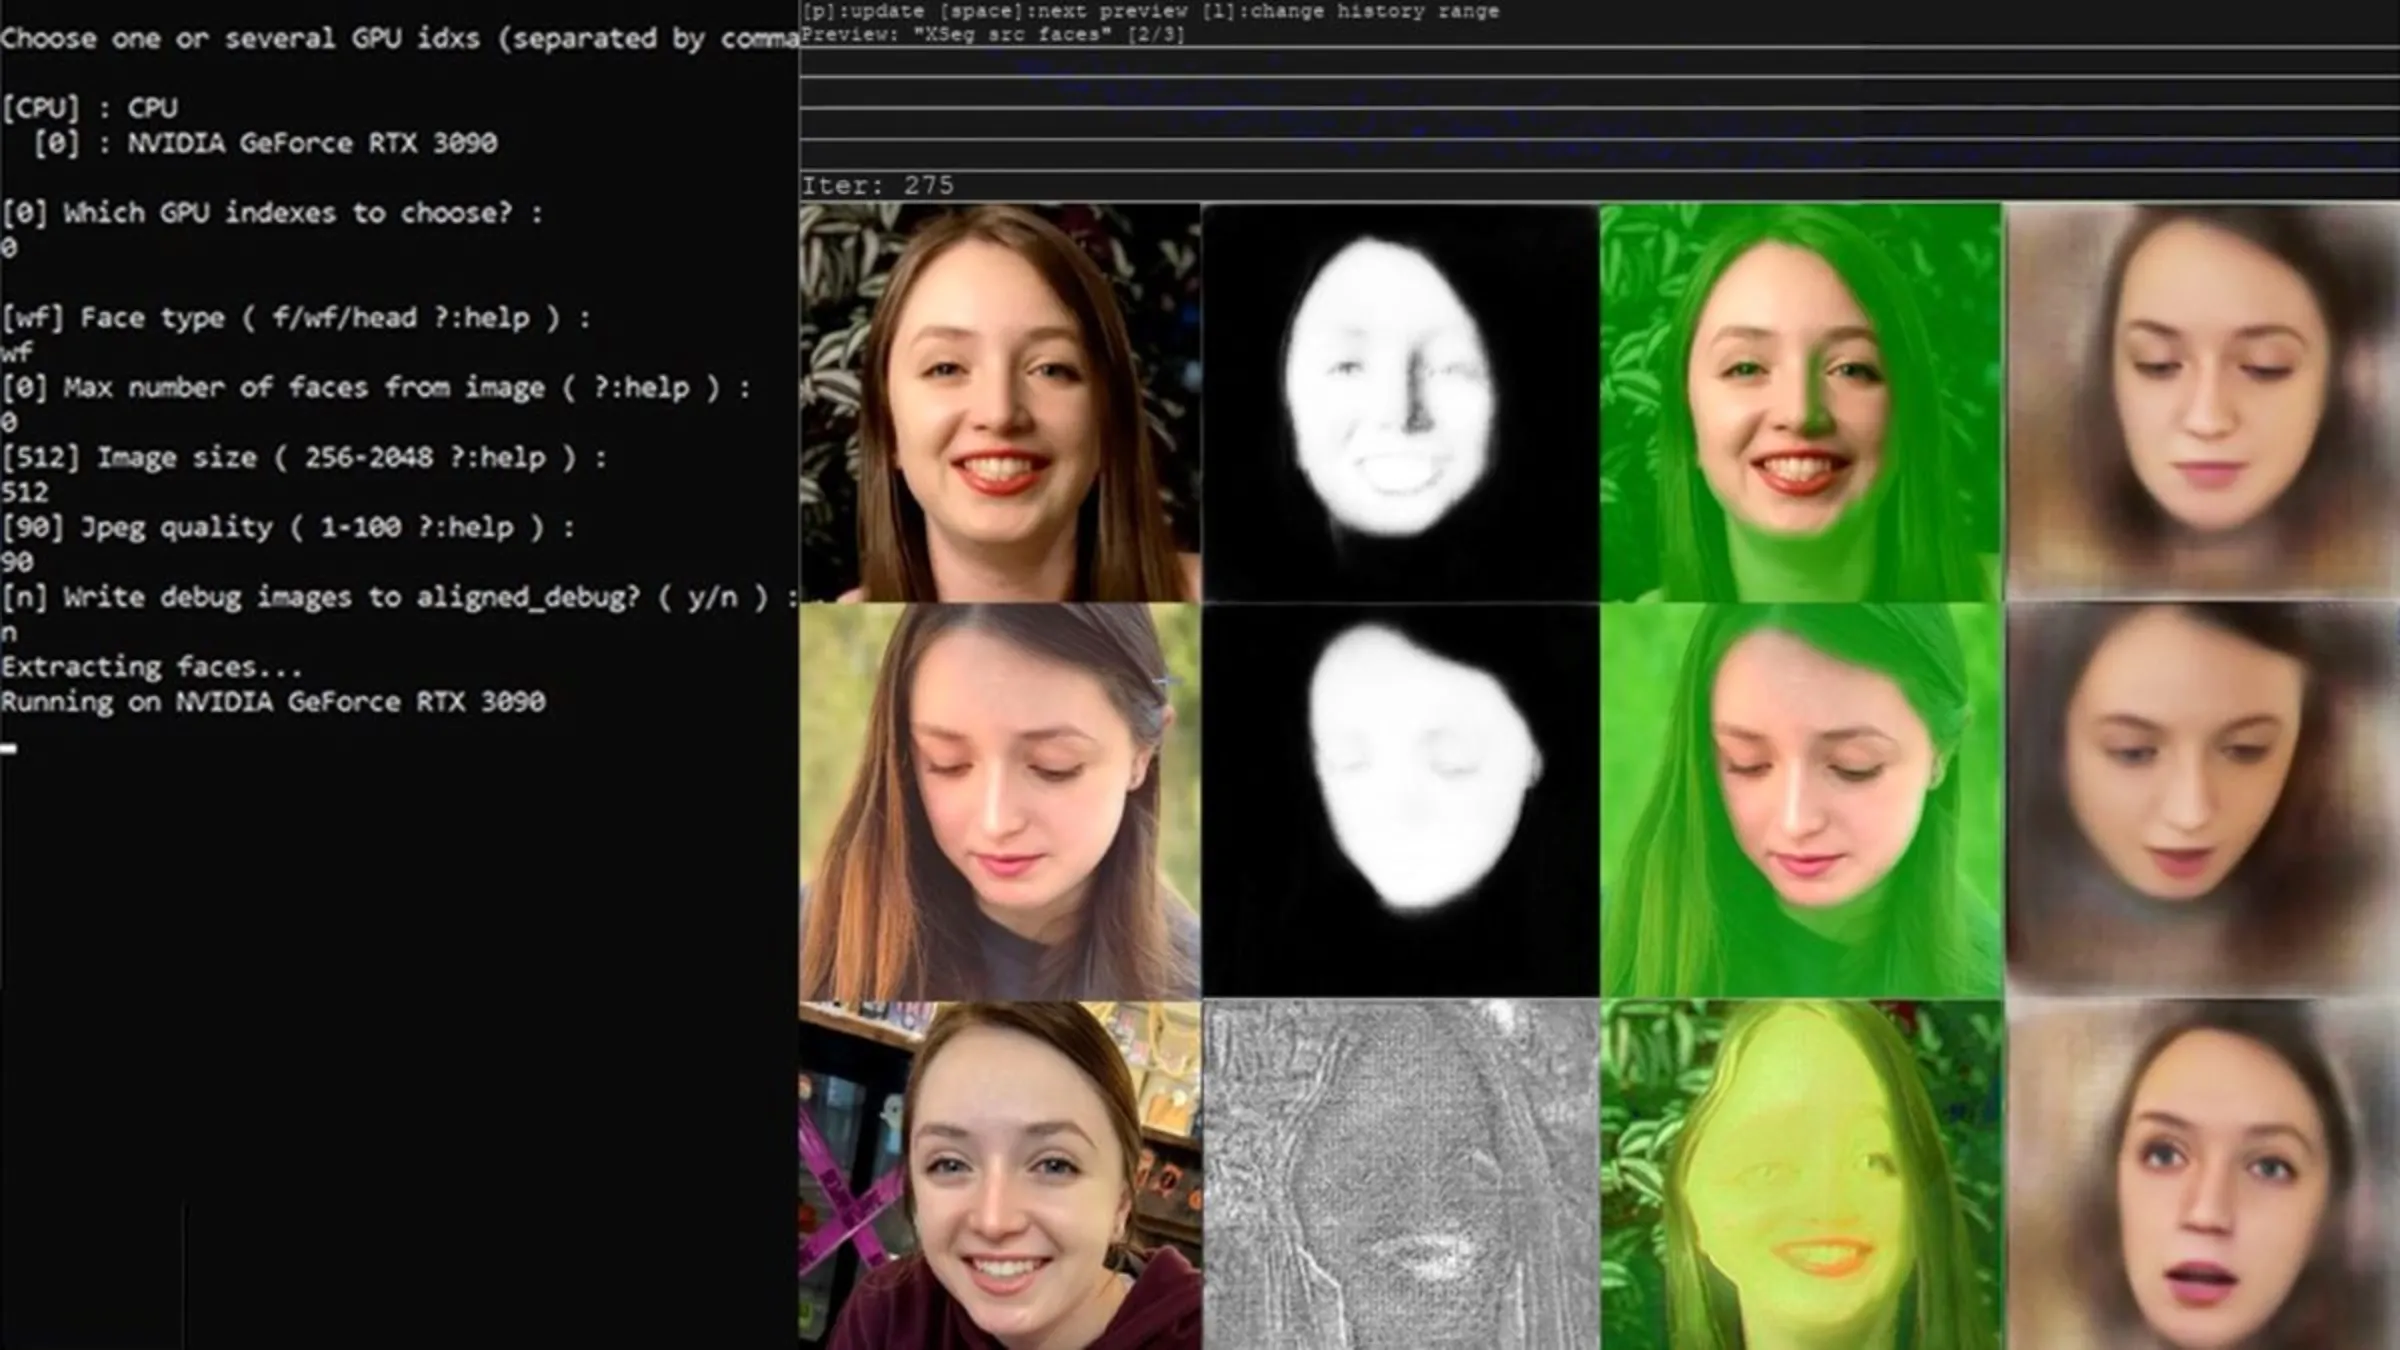 A still from the film Another Body about deepfake porn illustrates the use of AI technology to create a deepfake. WILLA/Handout via Thomson Reuters Foundation